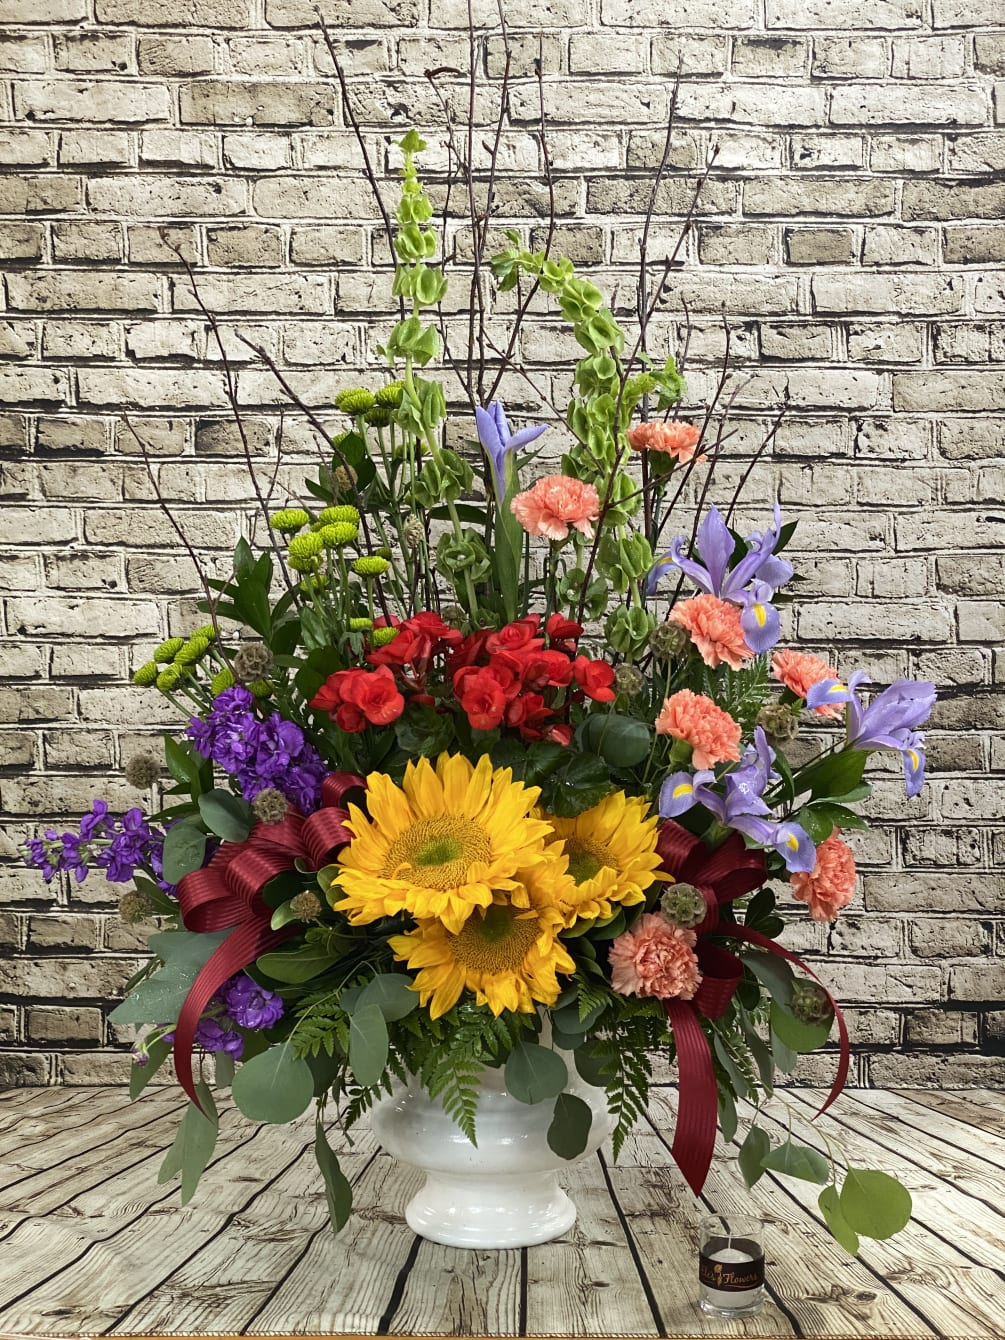 Our Wild Meadows Sympathy arrangement is a great way to share your